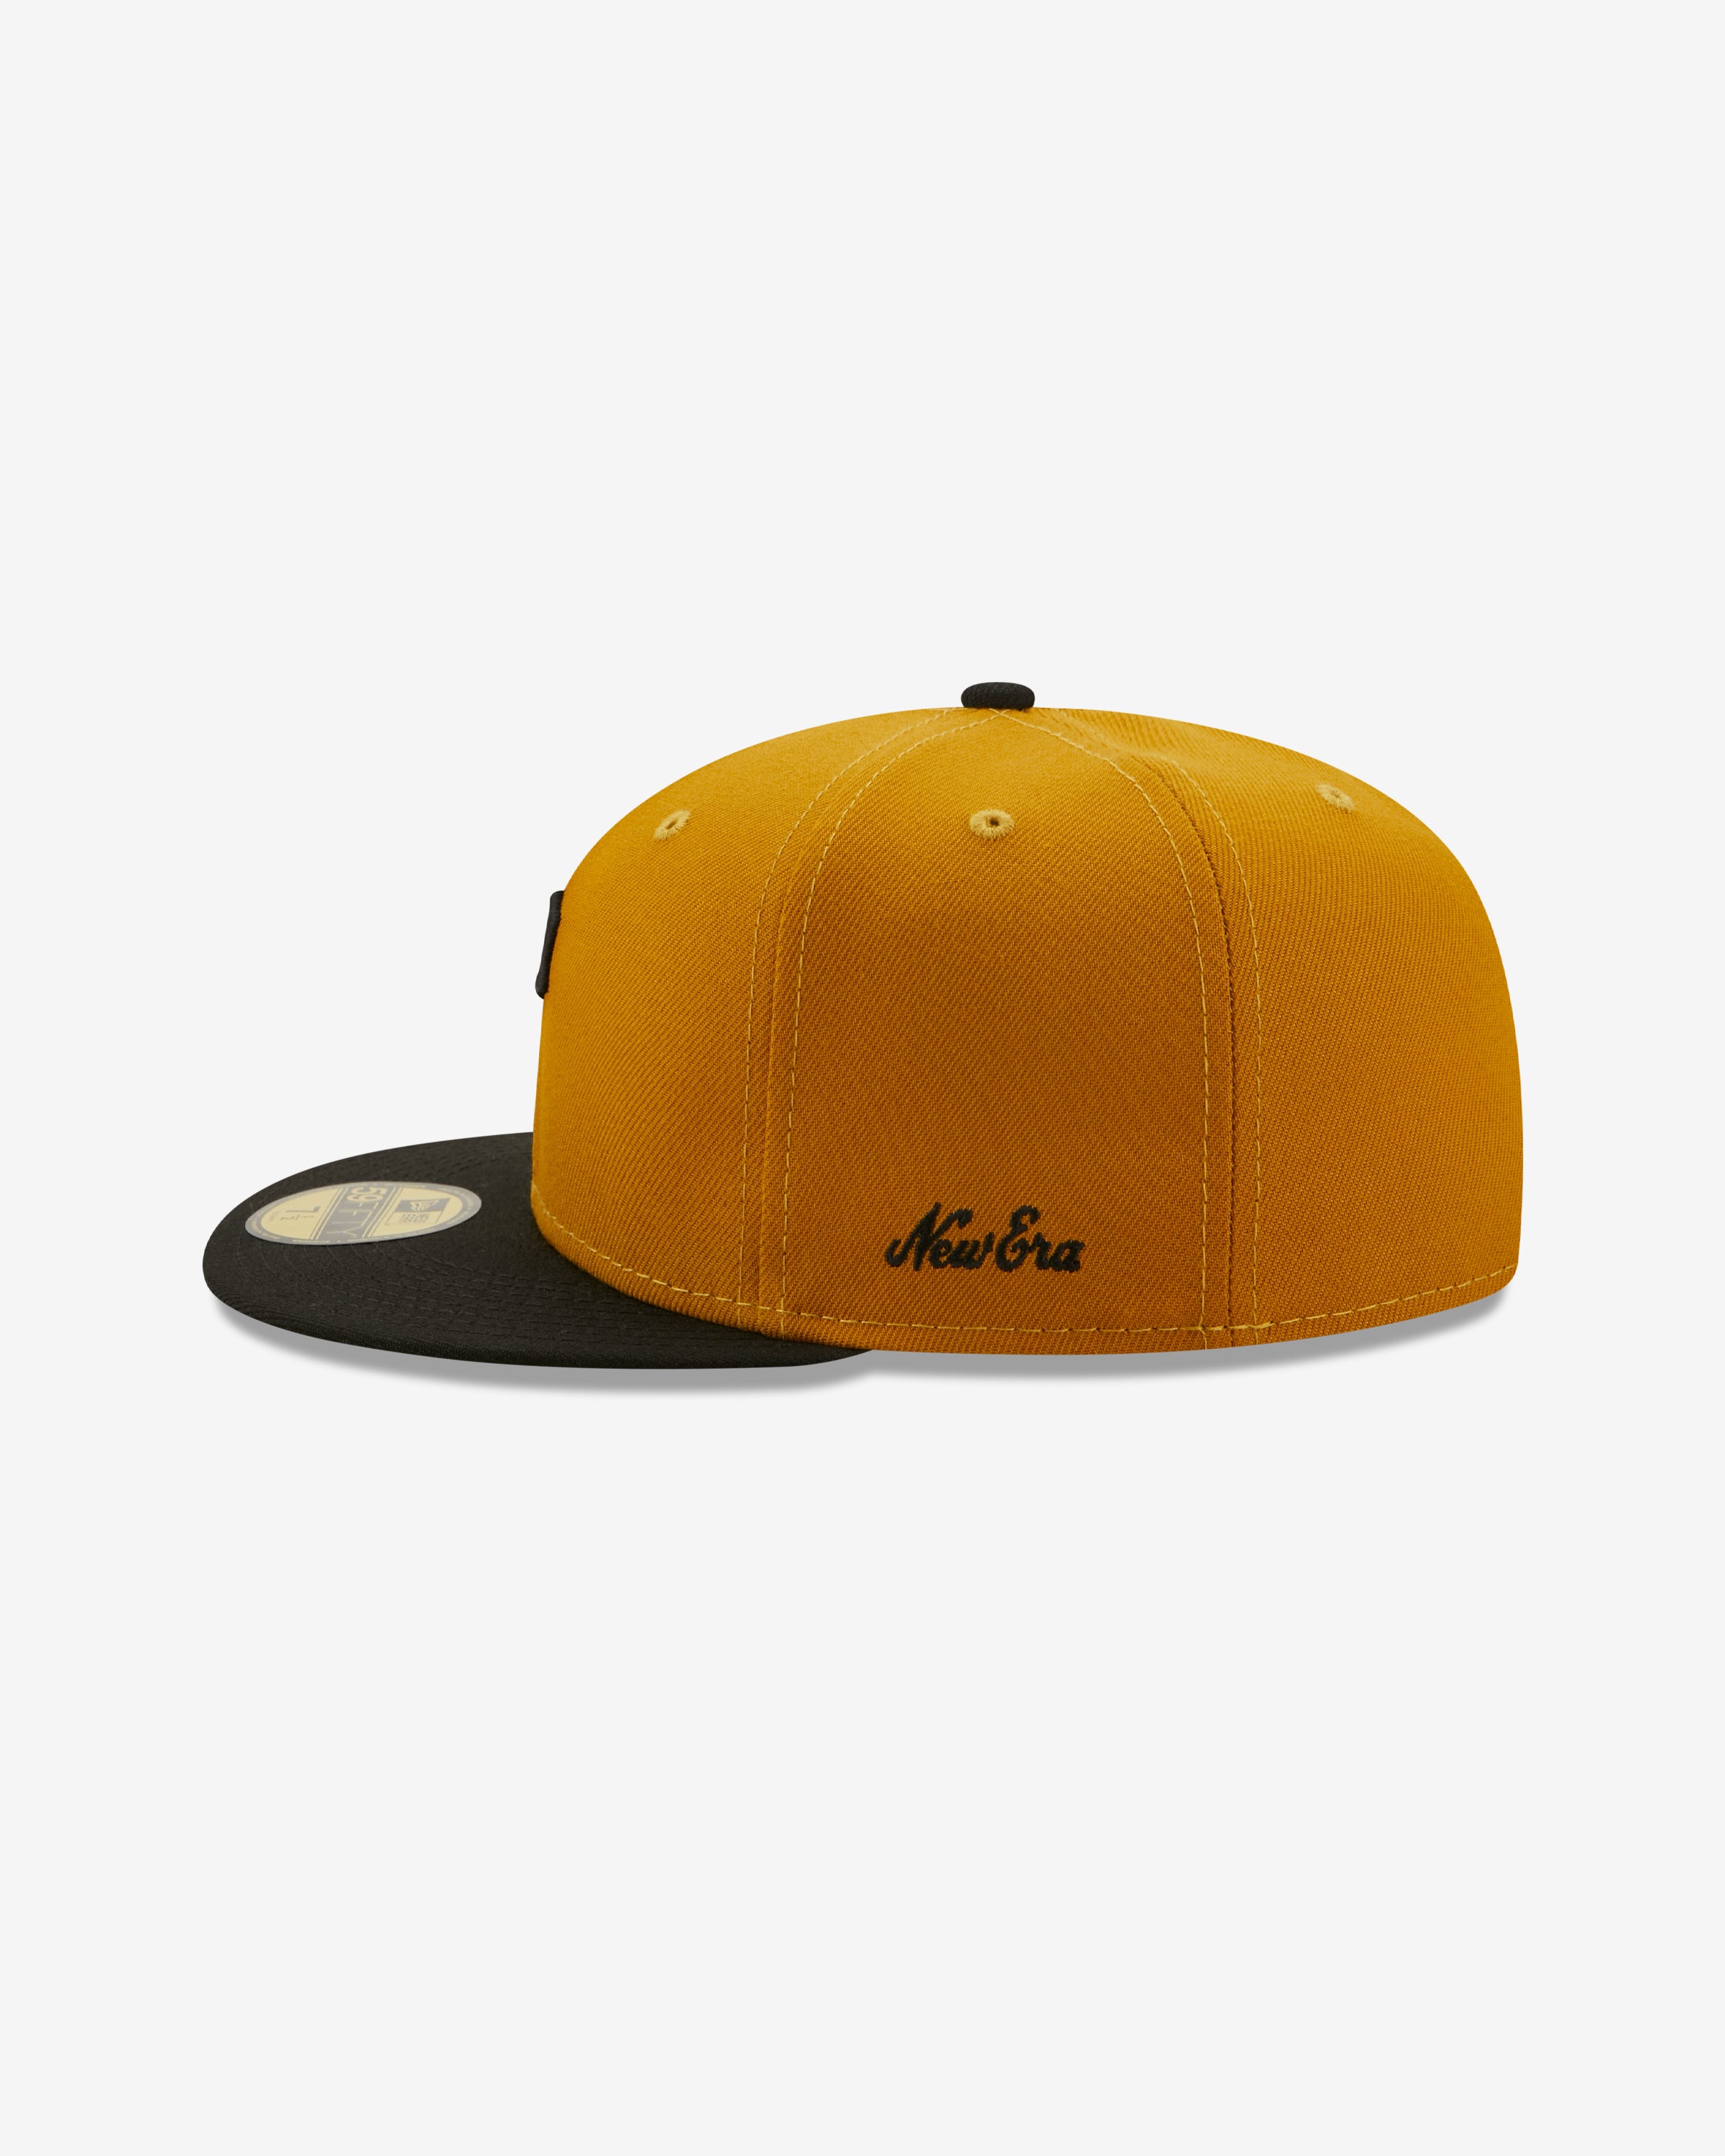 NEW ERA LOGO HISTORY 59FIFTY FITTED - PITTSBURGH PIRATES (1971)